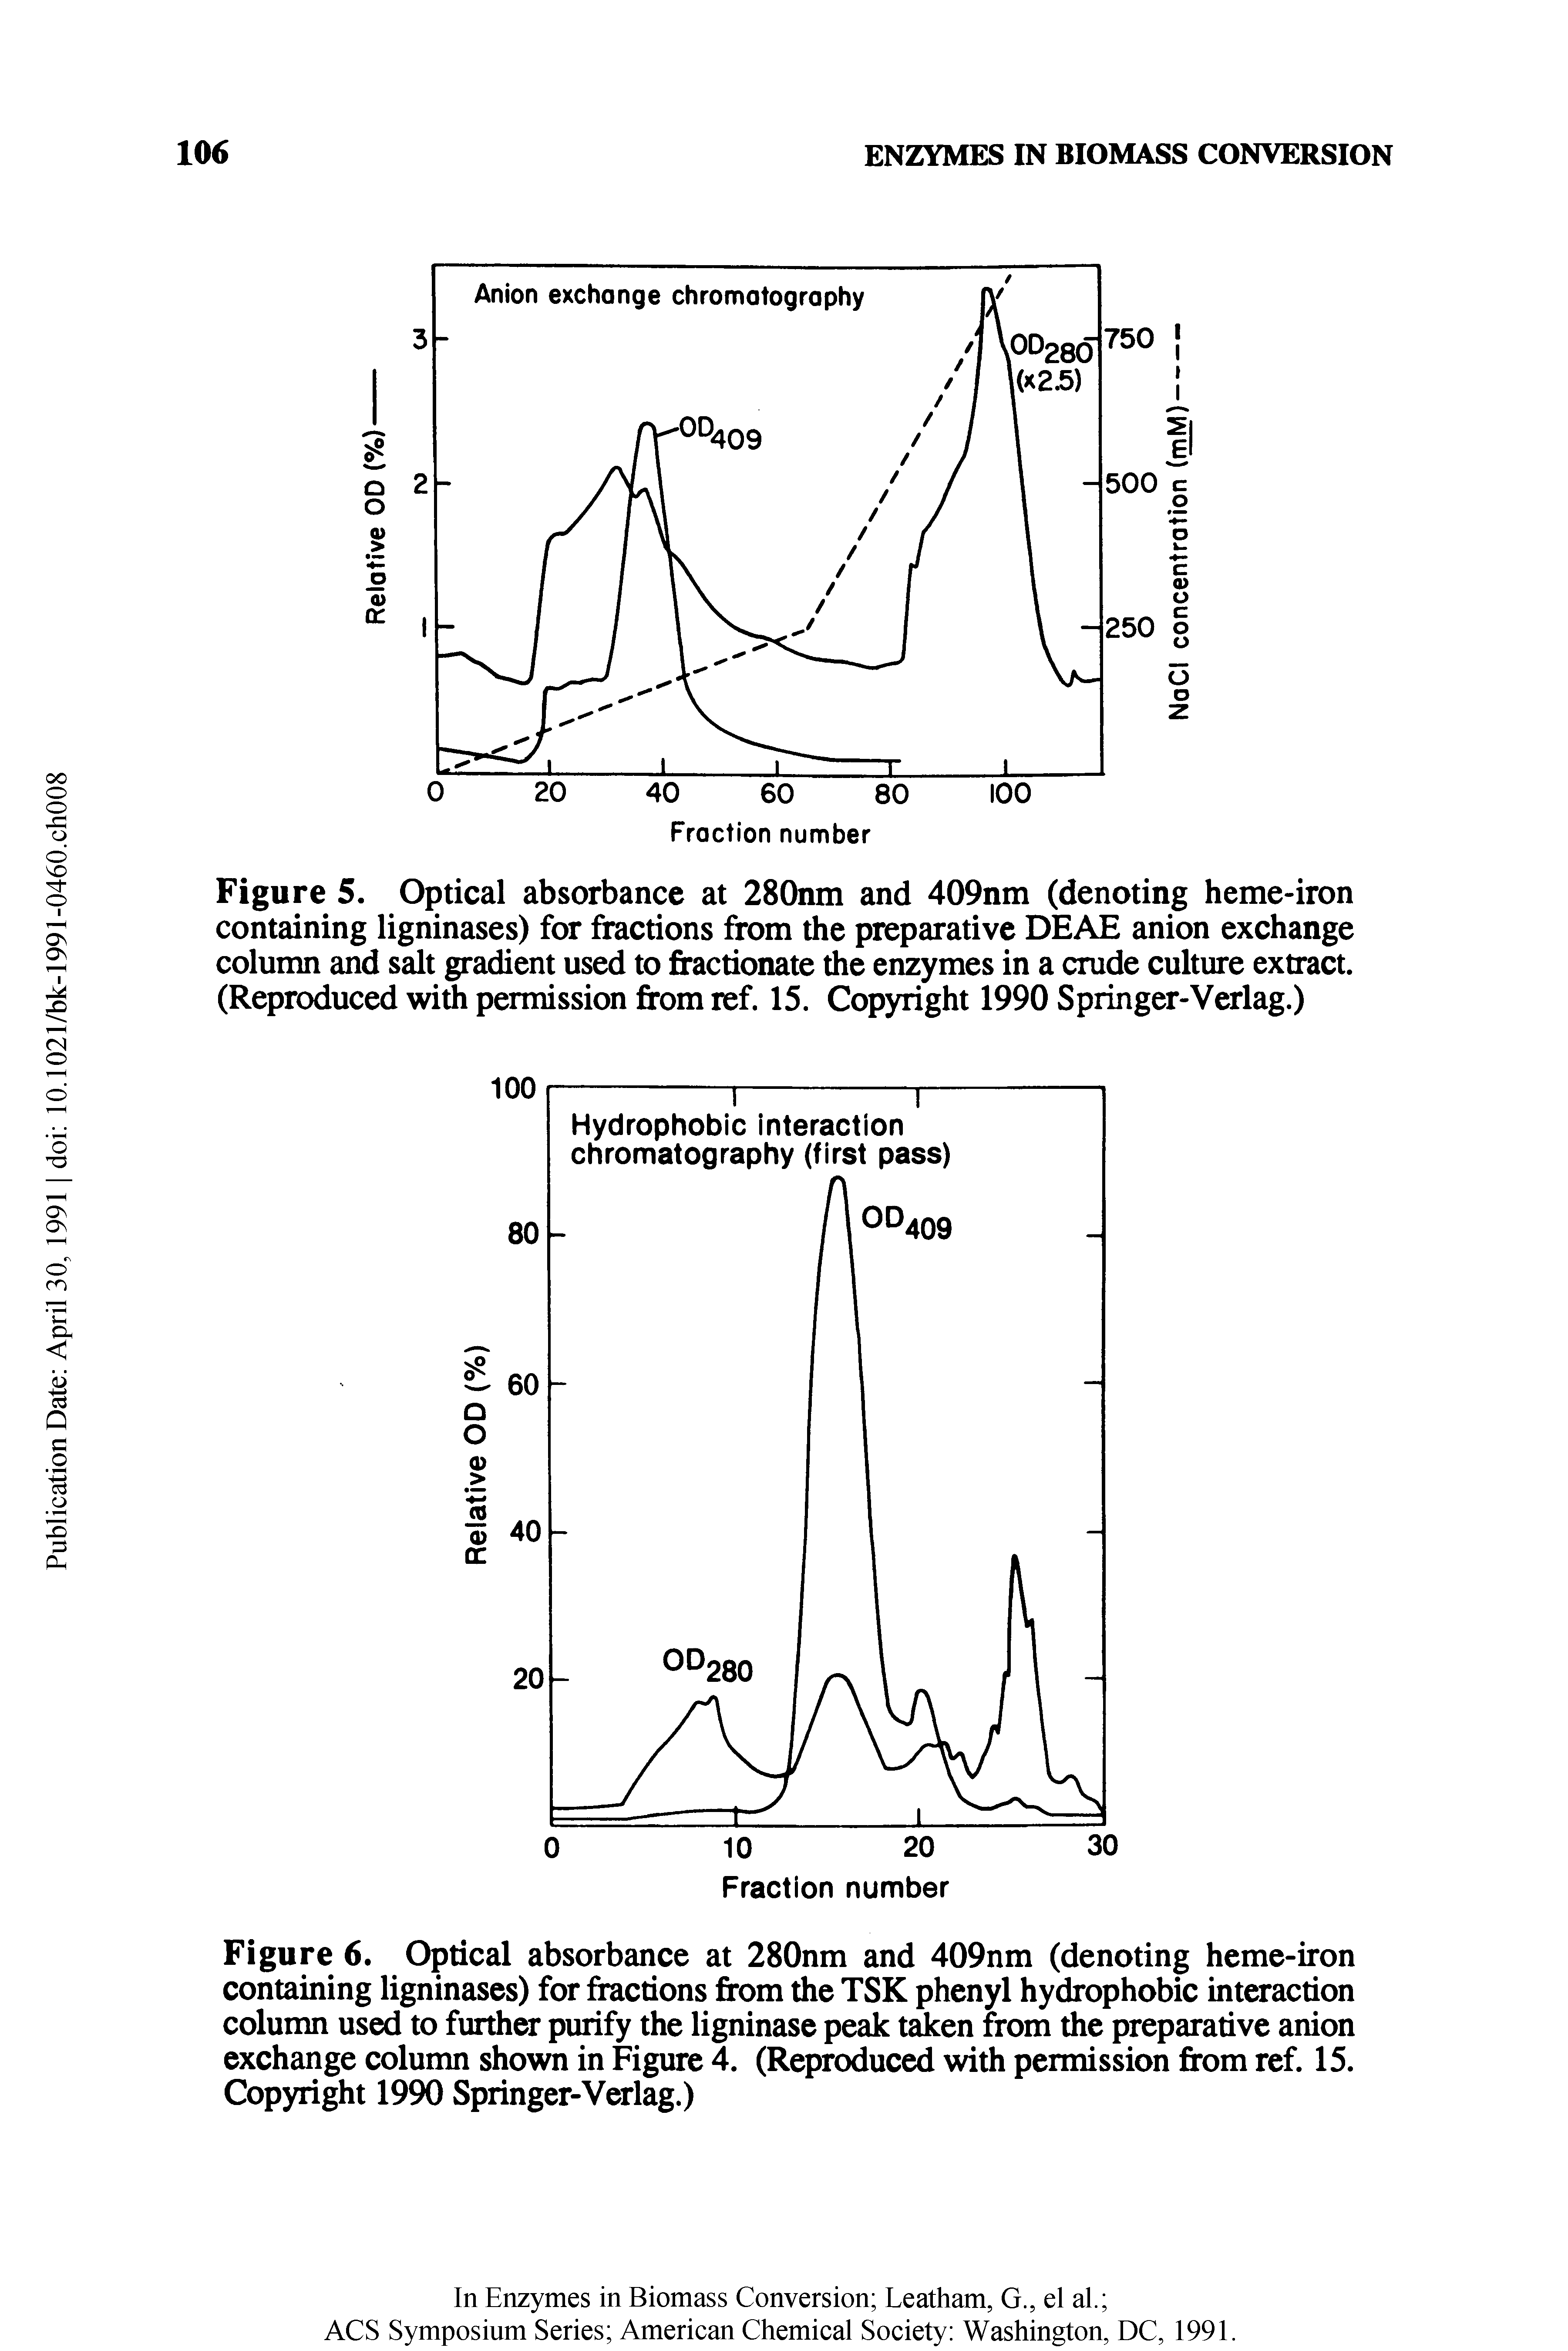 Figure 5. Optical absorbance at 280nm and 409nm (denoting heme-iron containing ligninases) for fractions from the preparative DEAE anion exchange column and salt gradient used to fractionate the enzymes in a crude culture extract. (Reproduced widi permission from ref. 15. Copyright 1990 Springer-Verlag.)...